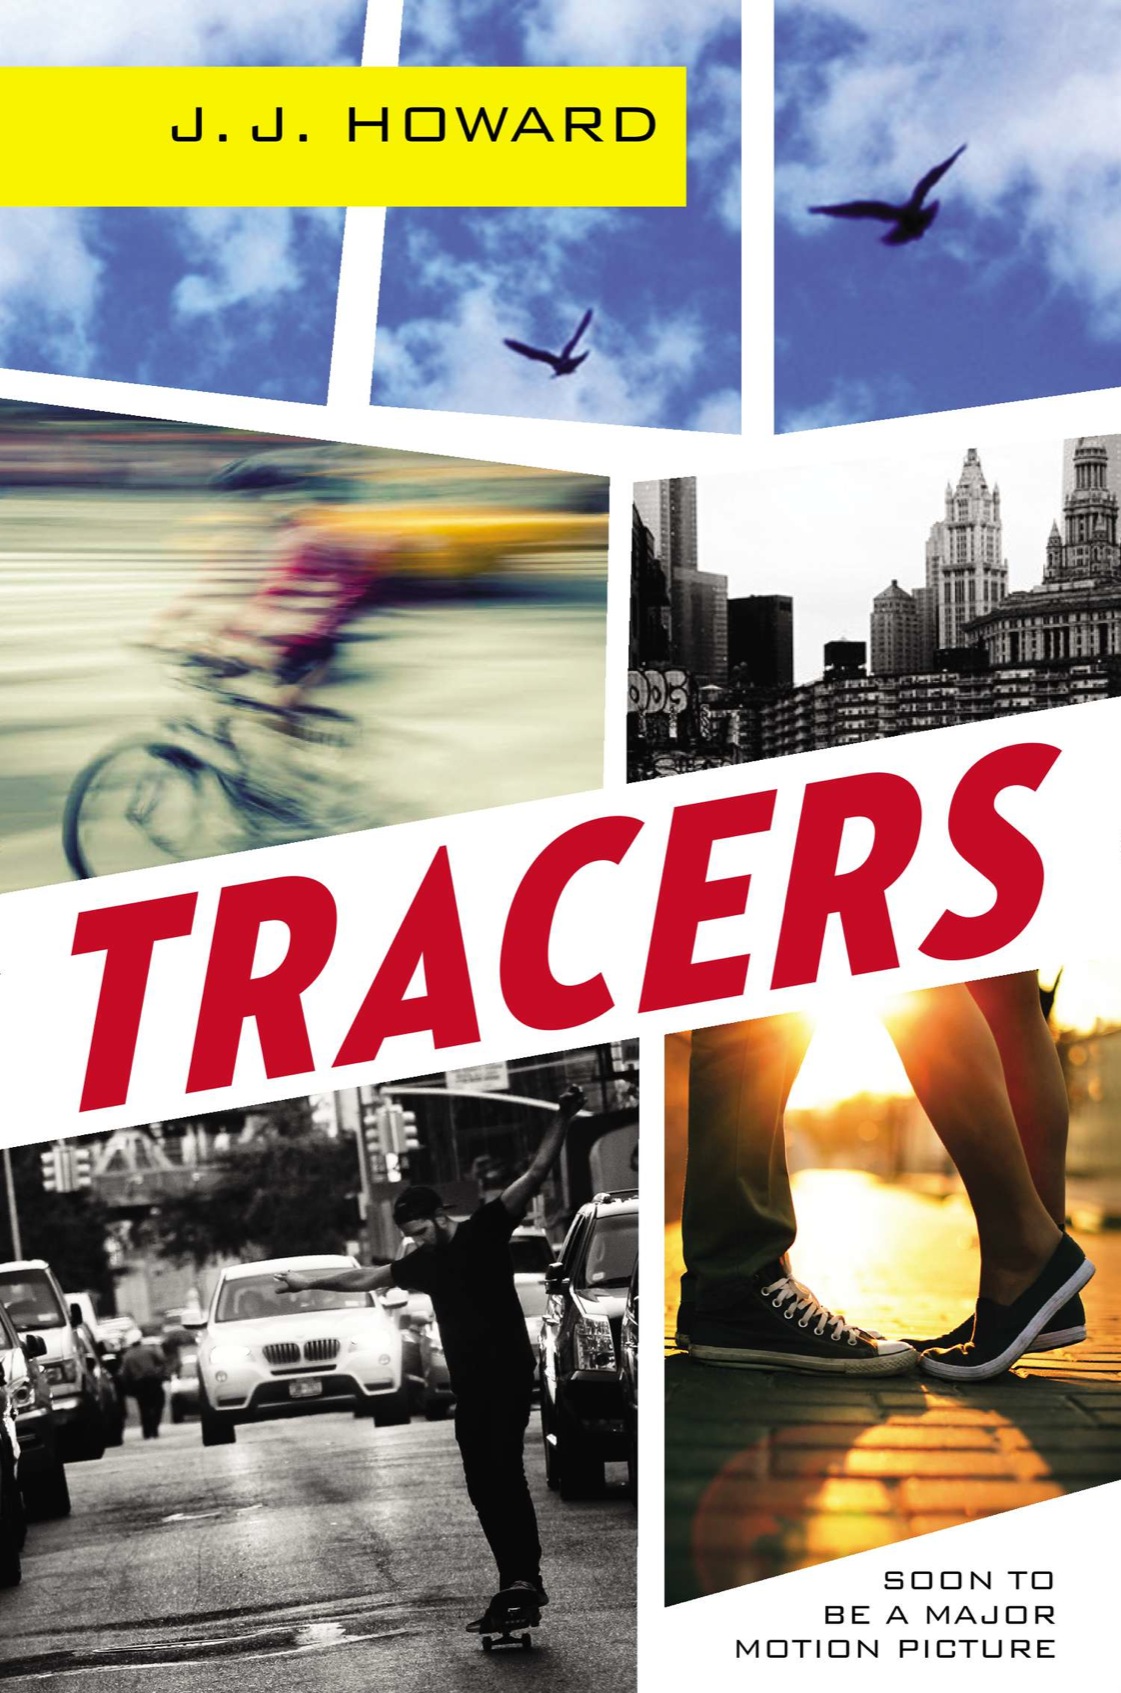 Tracers (2014) by J. J. Howard